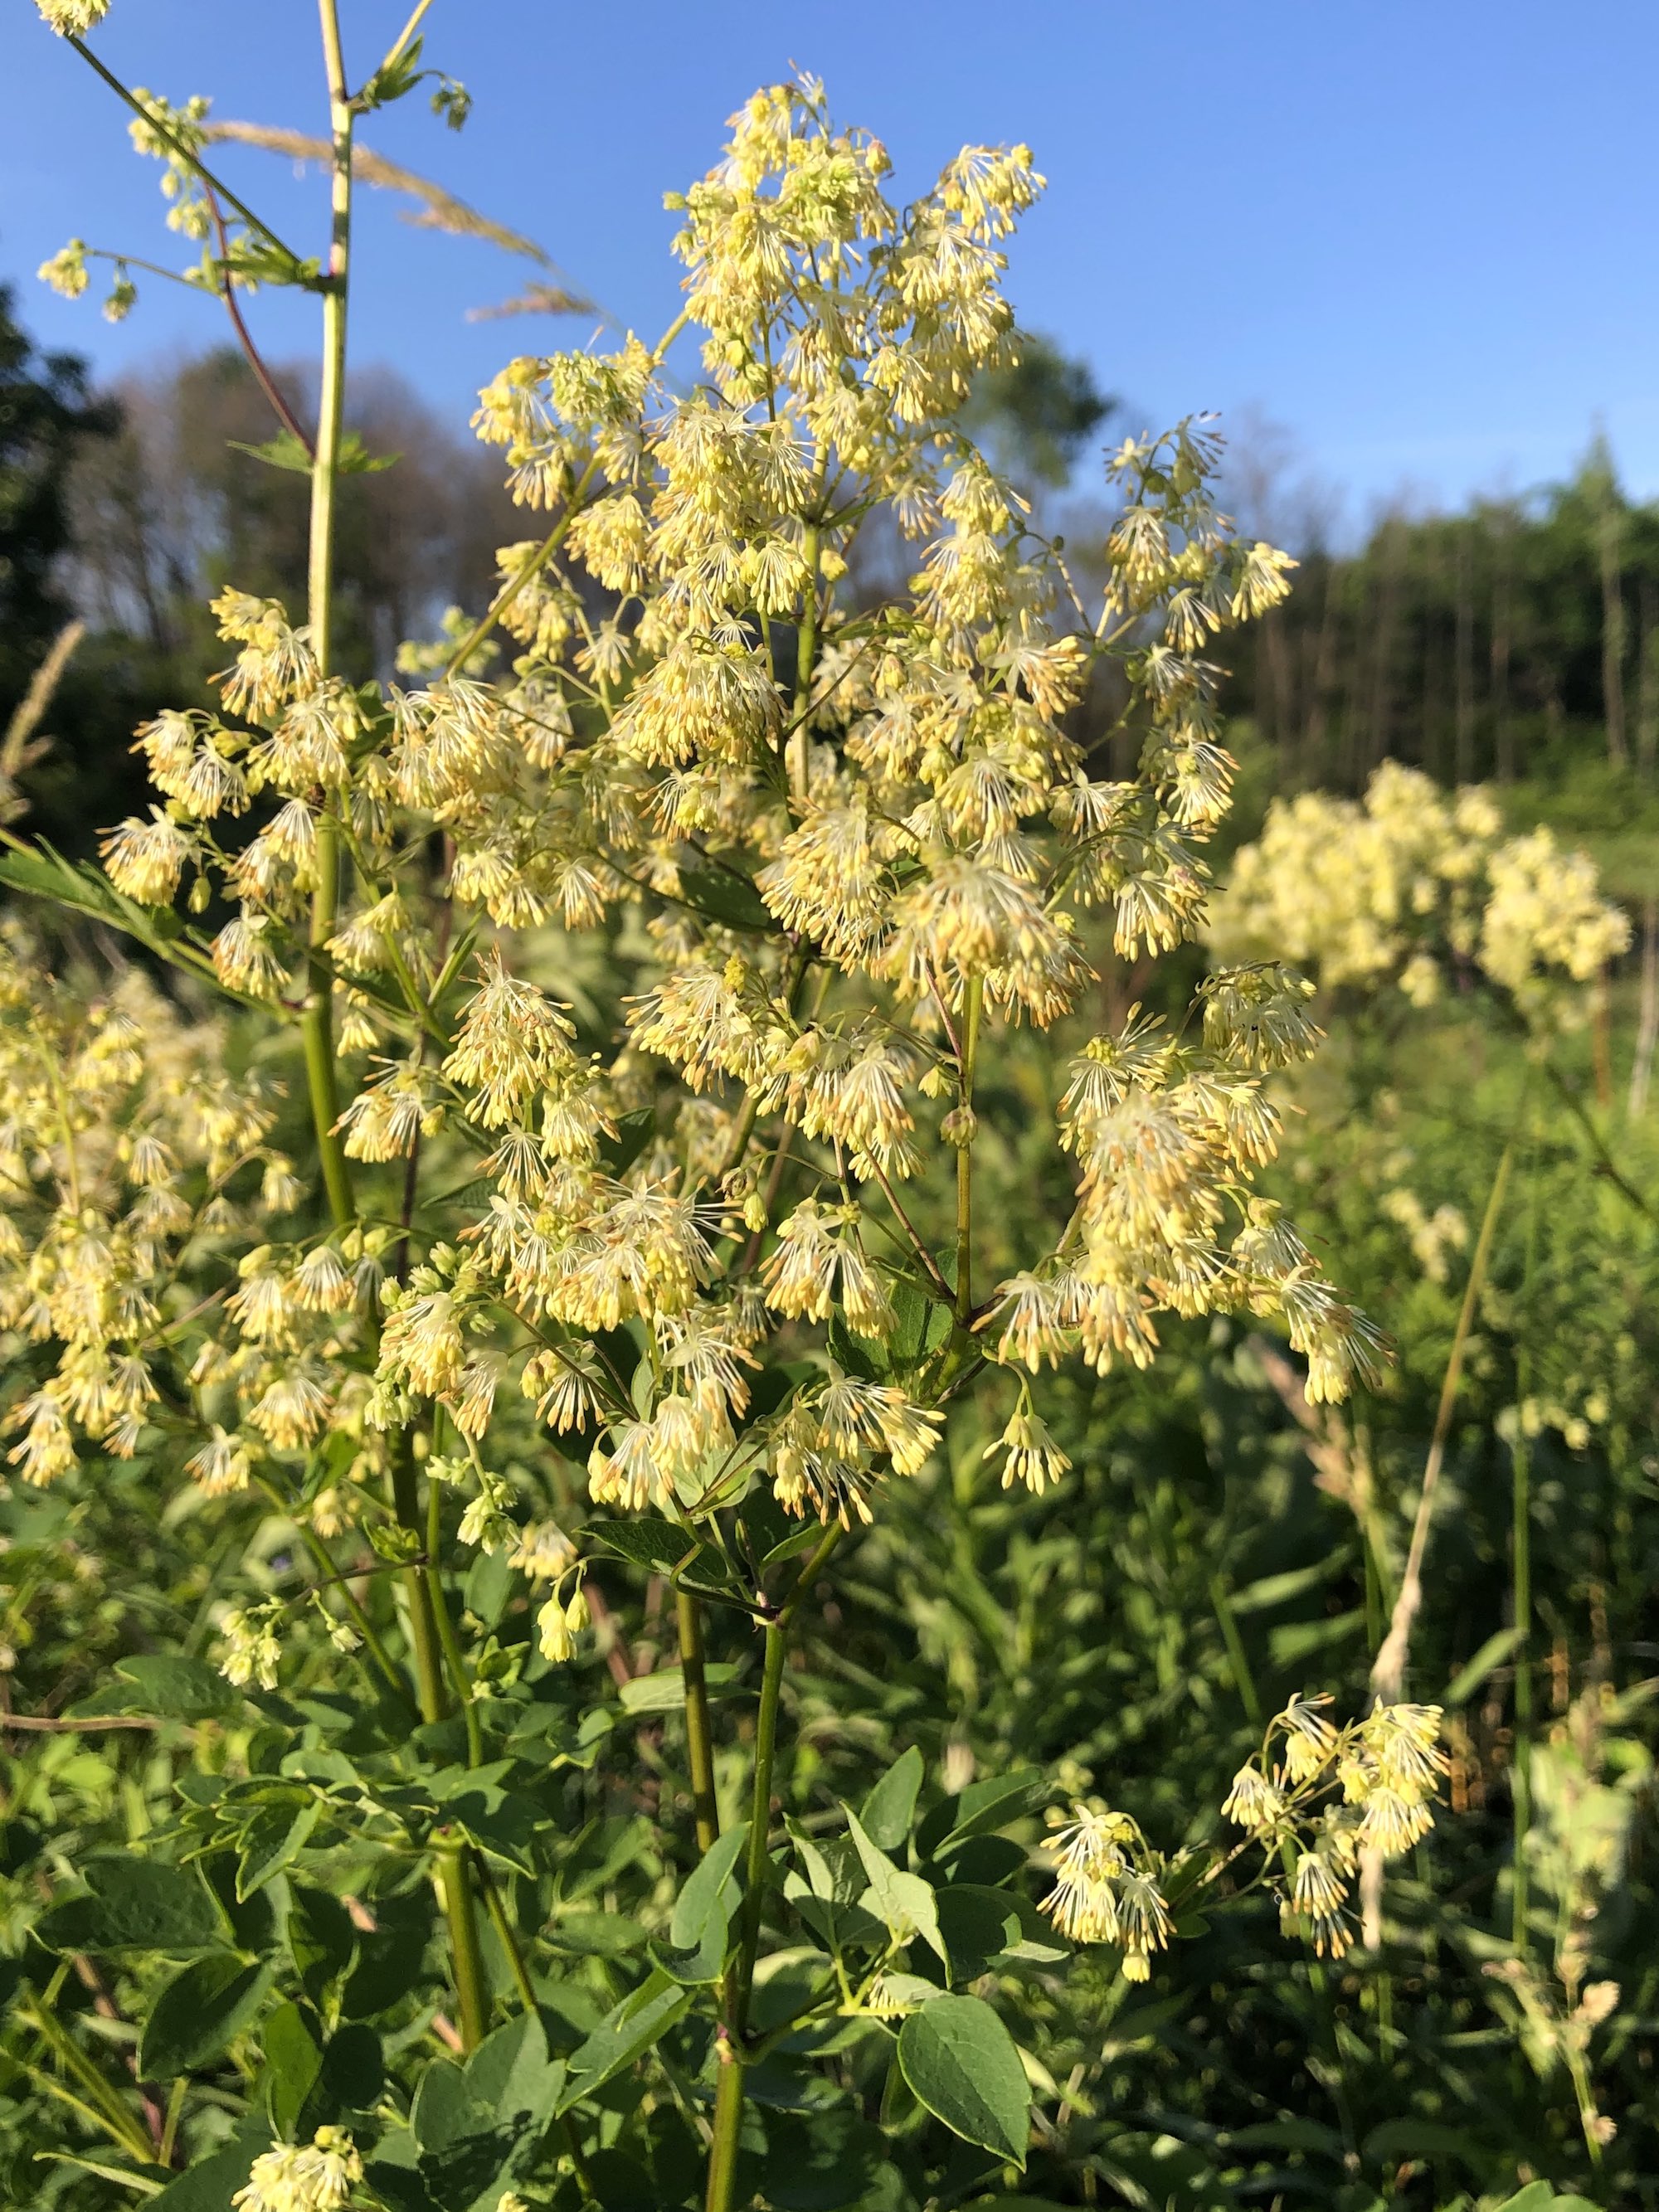 Tall Meadow-rue on shore of Marion Dunn Pond on June 16, 2020.